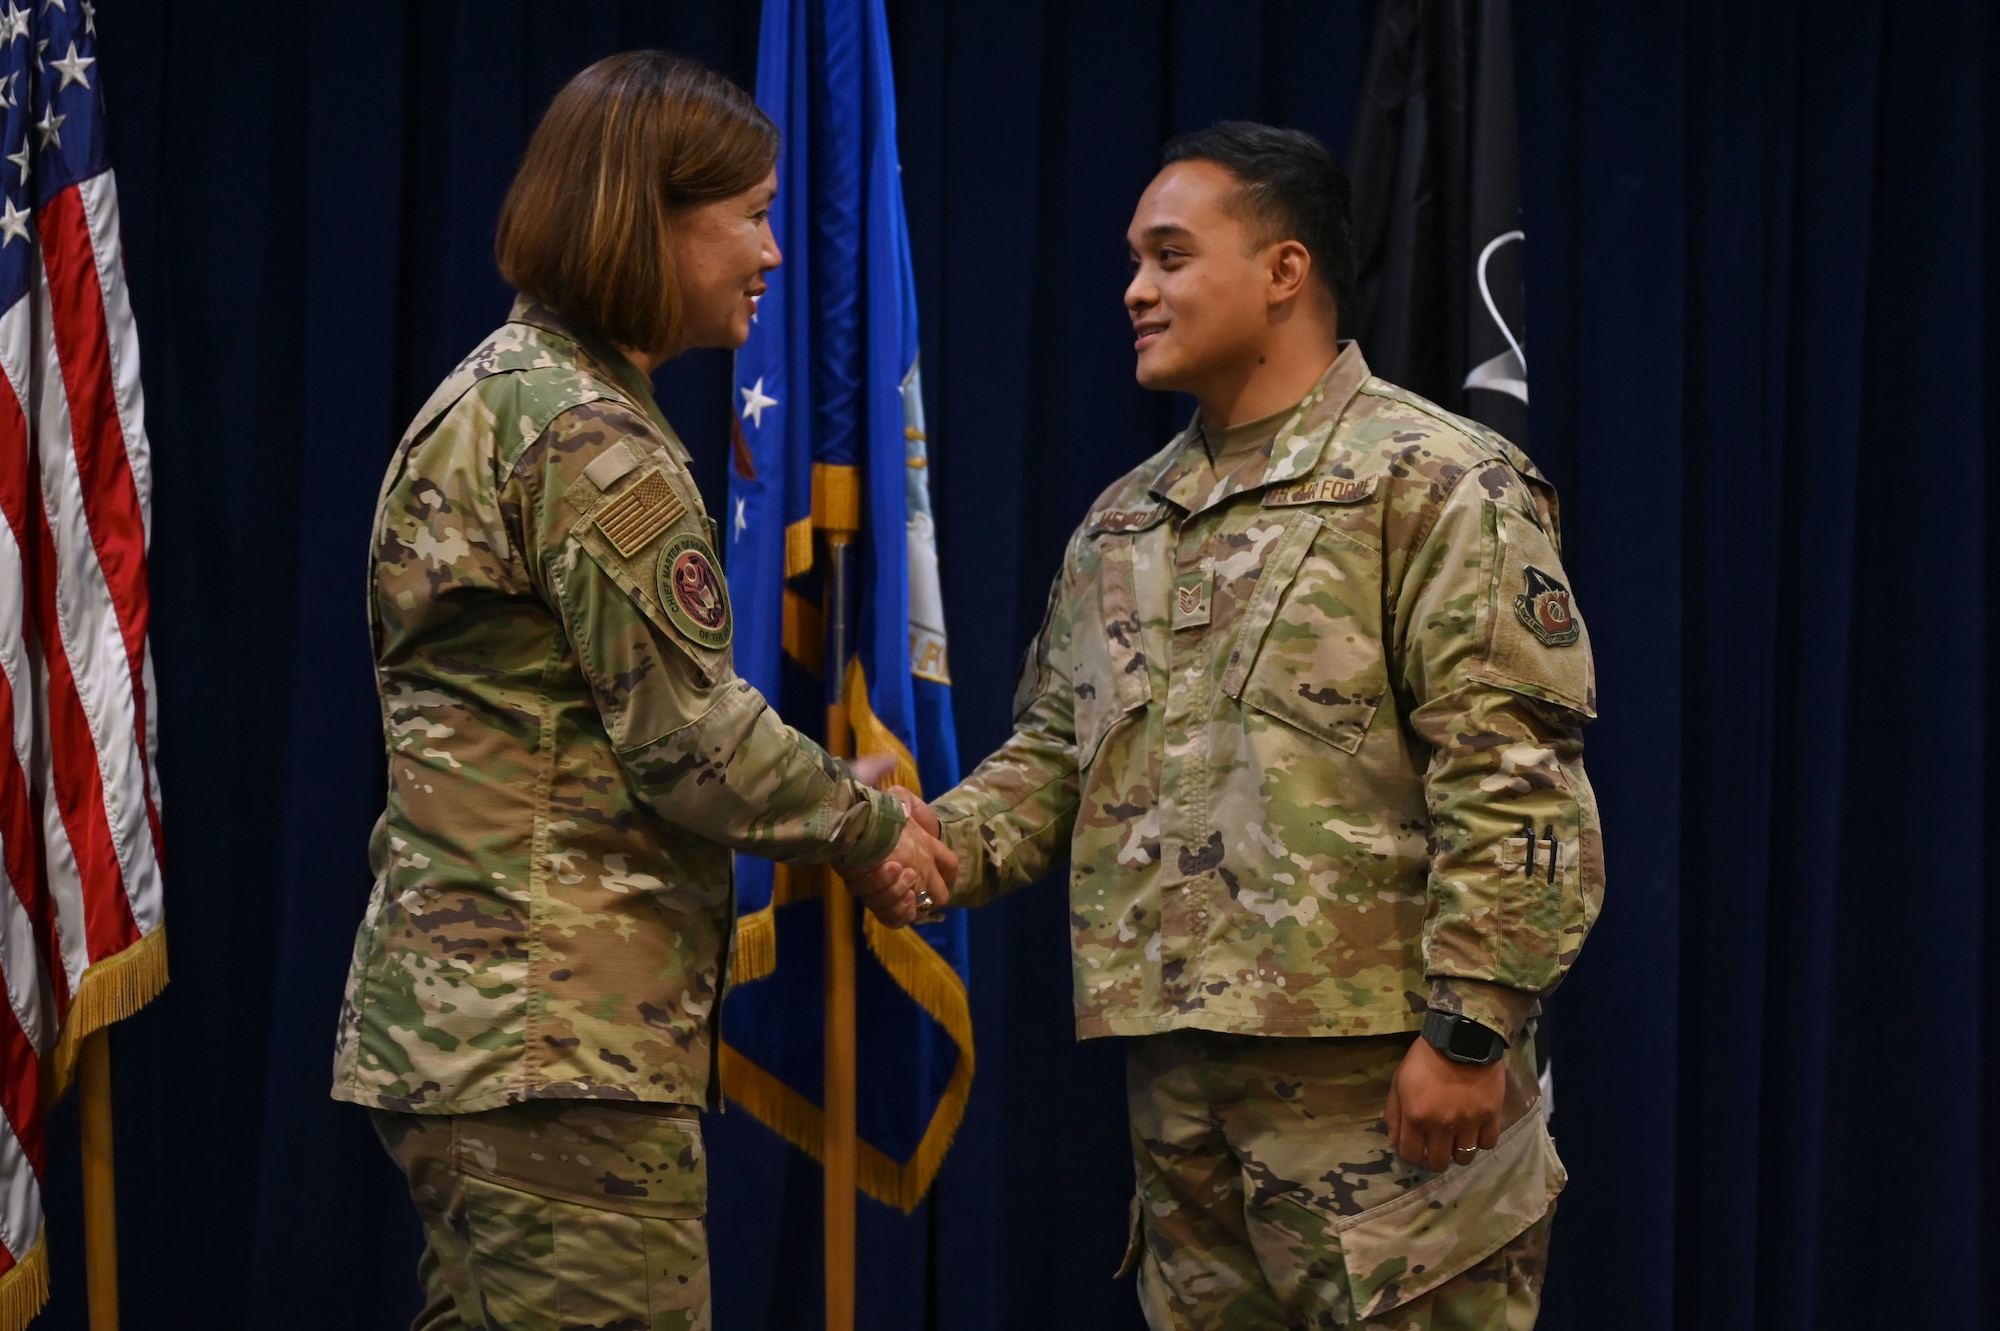 Chief Master Sgt. of the Air Force JoAnne S. Bass coins Tech. Sgt. Darwincarl Mendoza, 61st Medical Squadron bio environmental engineer, after an enlisted all call July 1, 2021, at Los Angeles Air Force Base, California. Bass thanked Space and Missile Systems Center and 61st Air base Group enlisted members for their dedication to the U.S. Air and Space Force and their perspective and honest feedback on service-wide initiatives. (U.S. Space Force photo by Staff Sgt. Andrew Moore)